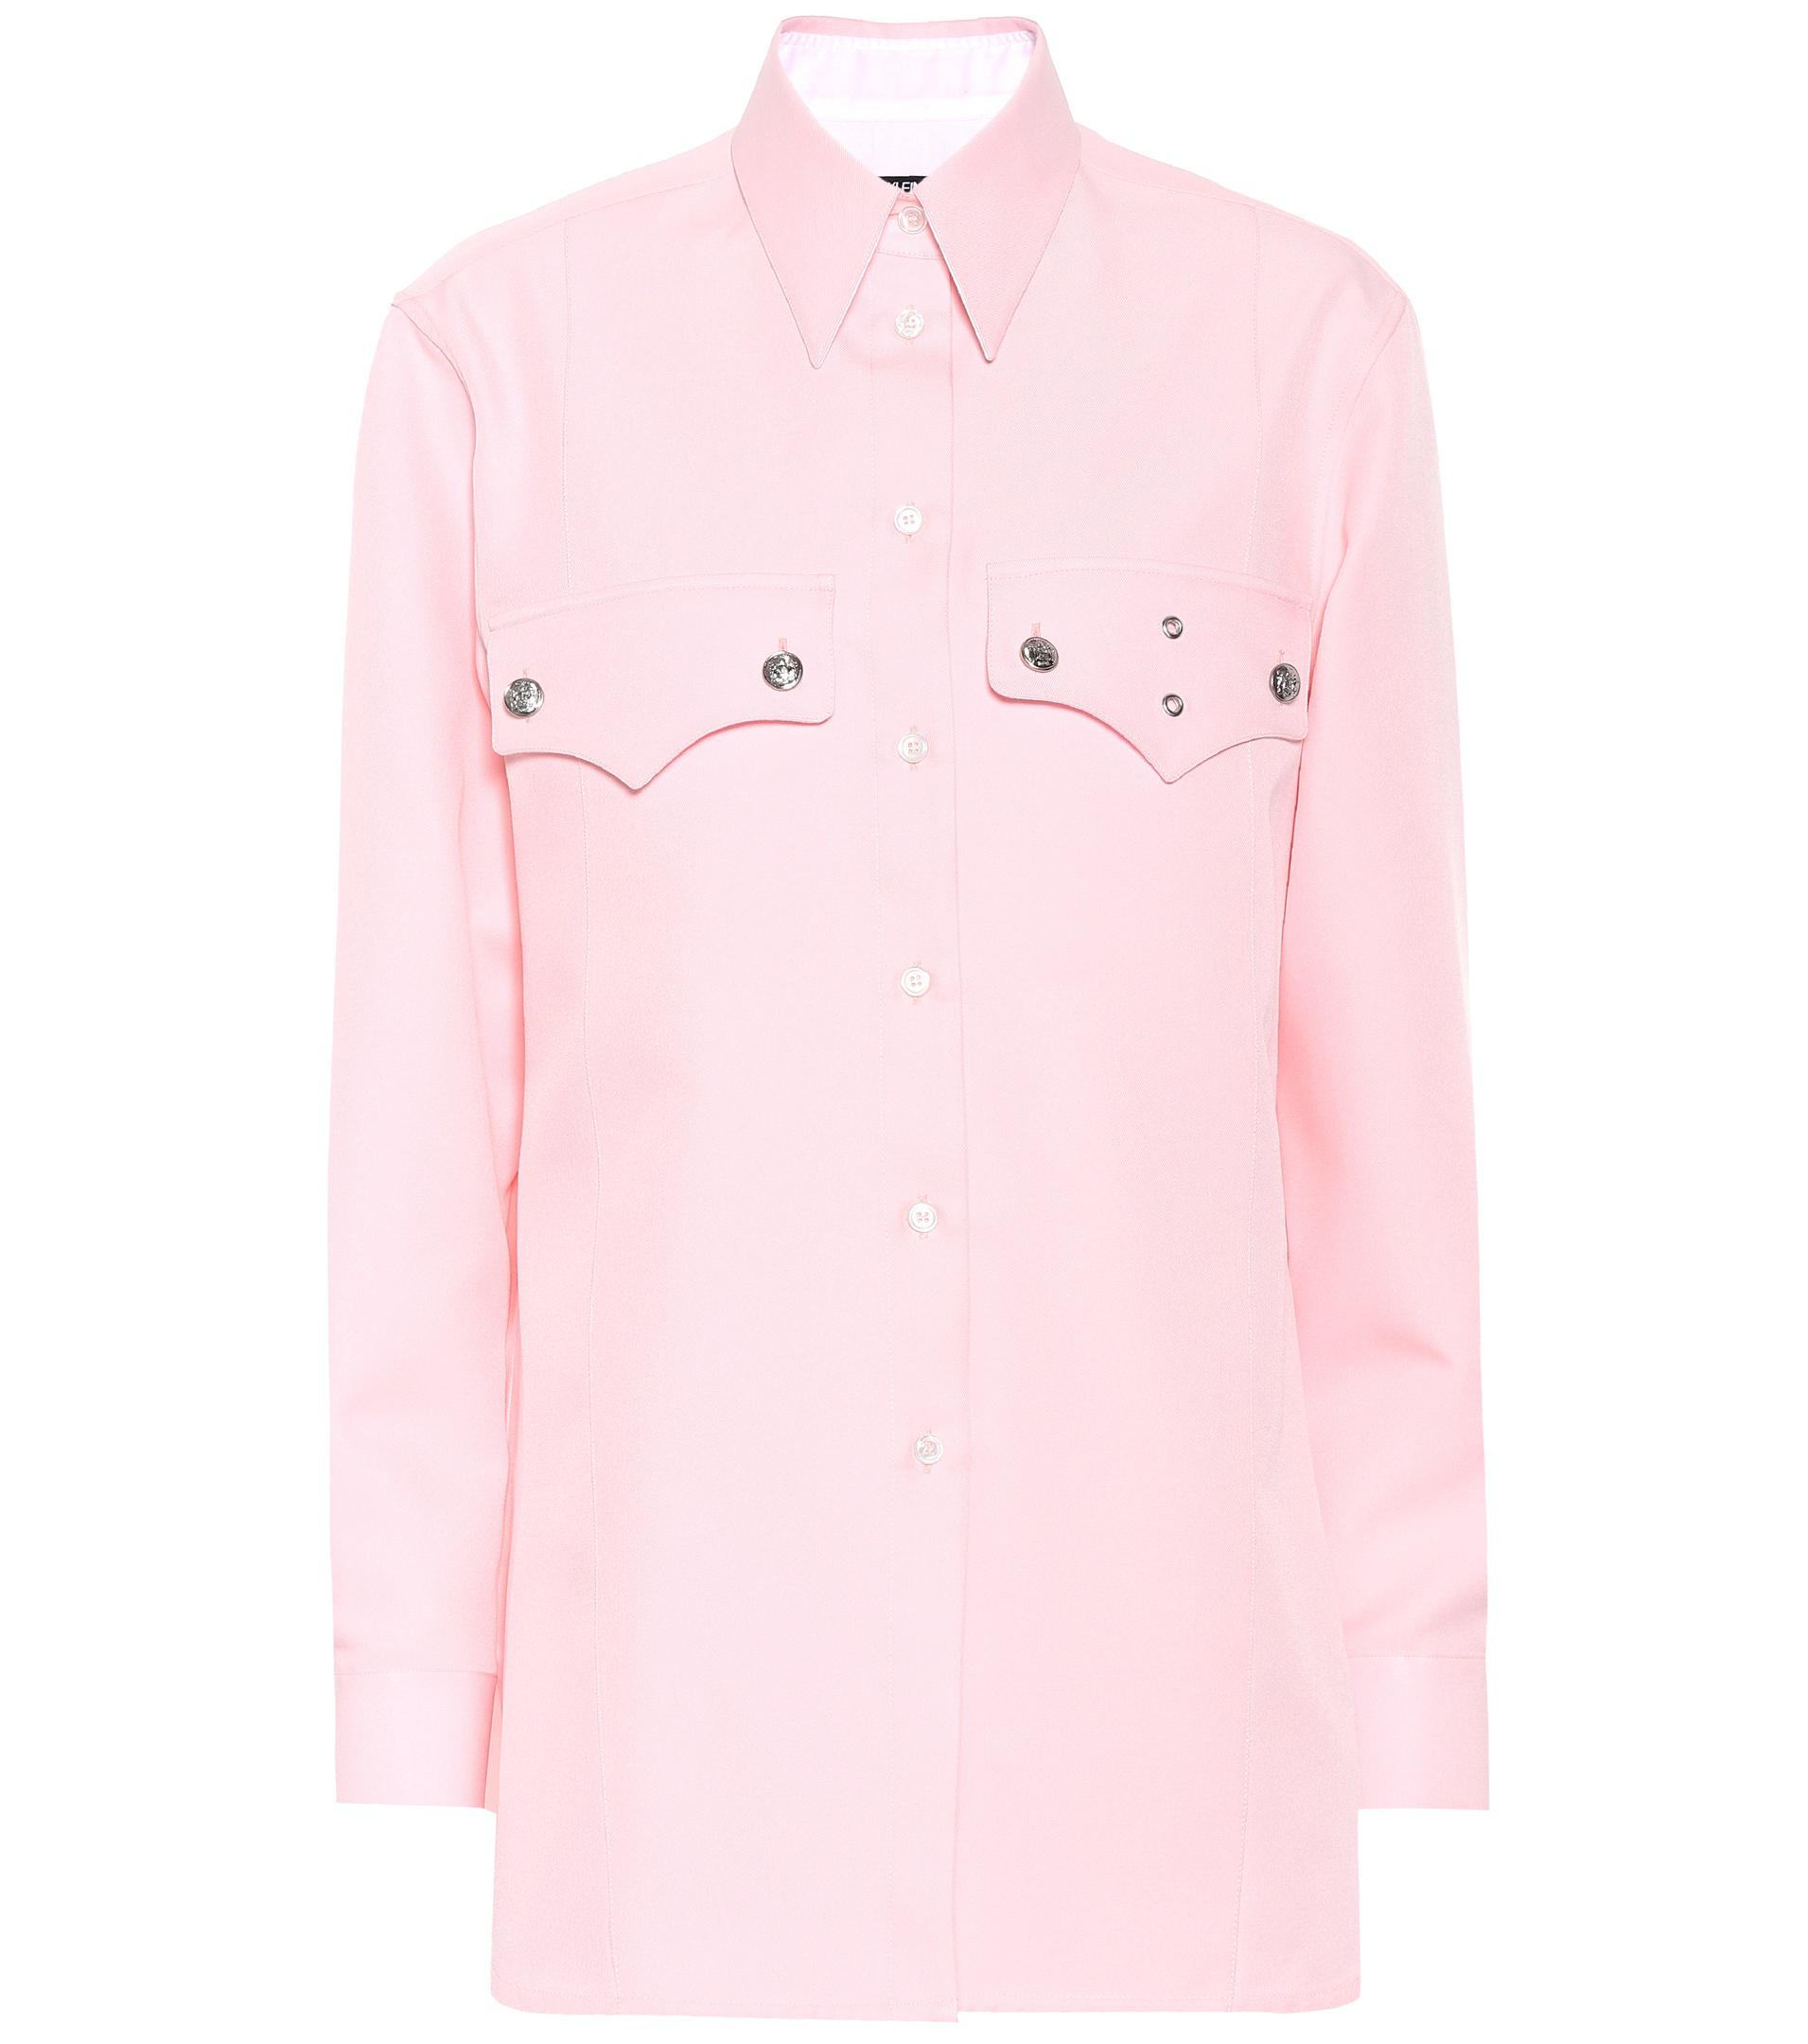 CALVIN KLEIN 205W39NYC Synthetic Button-down Shirt in Rose (Pink) - Lyst